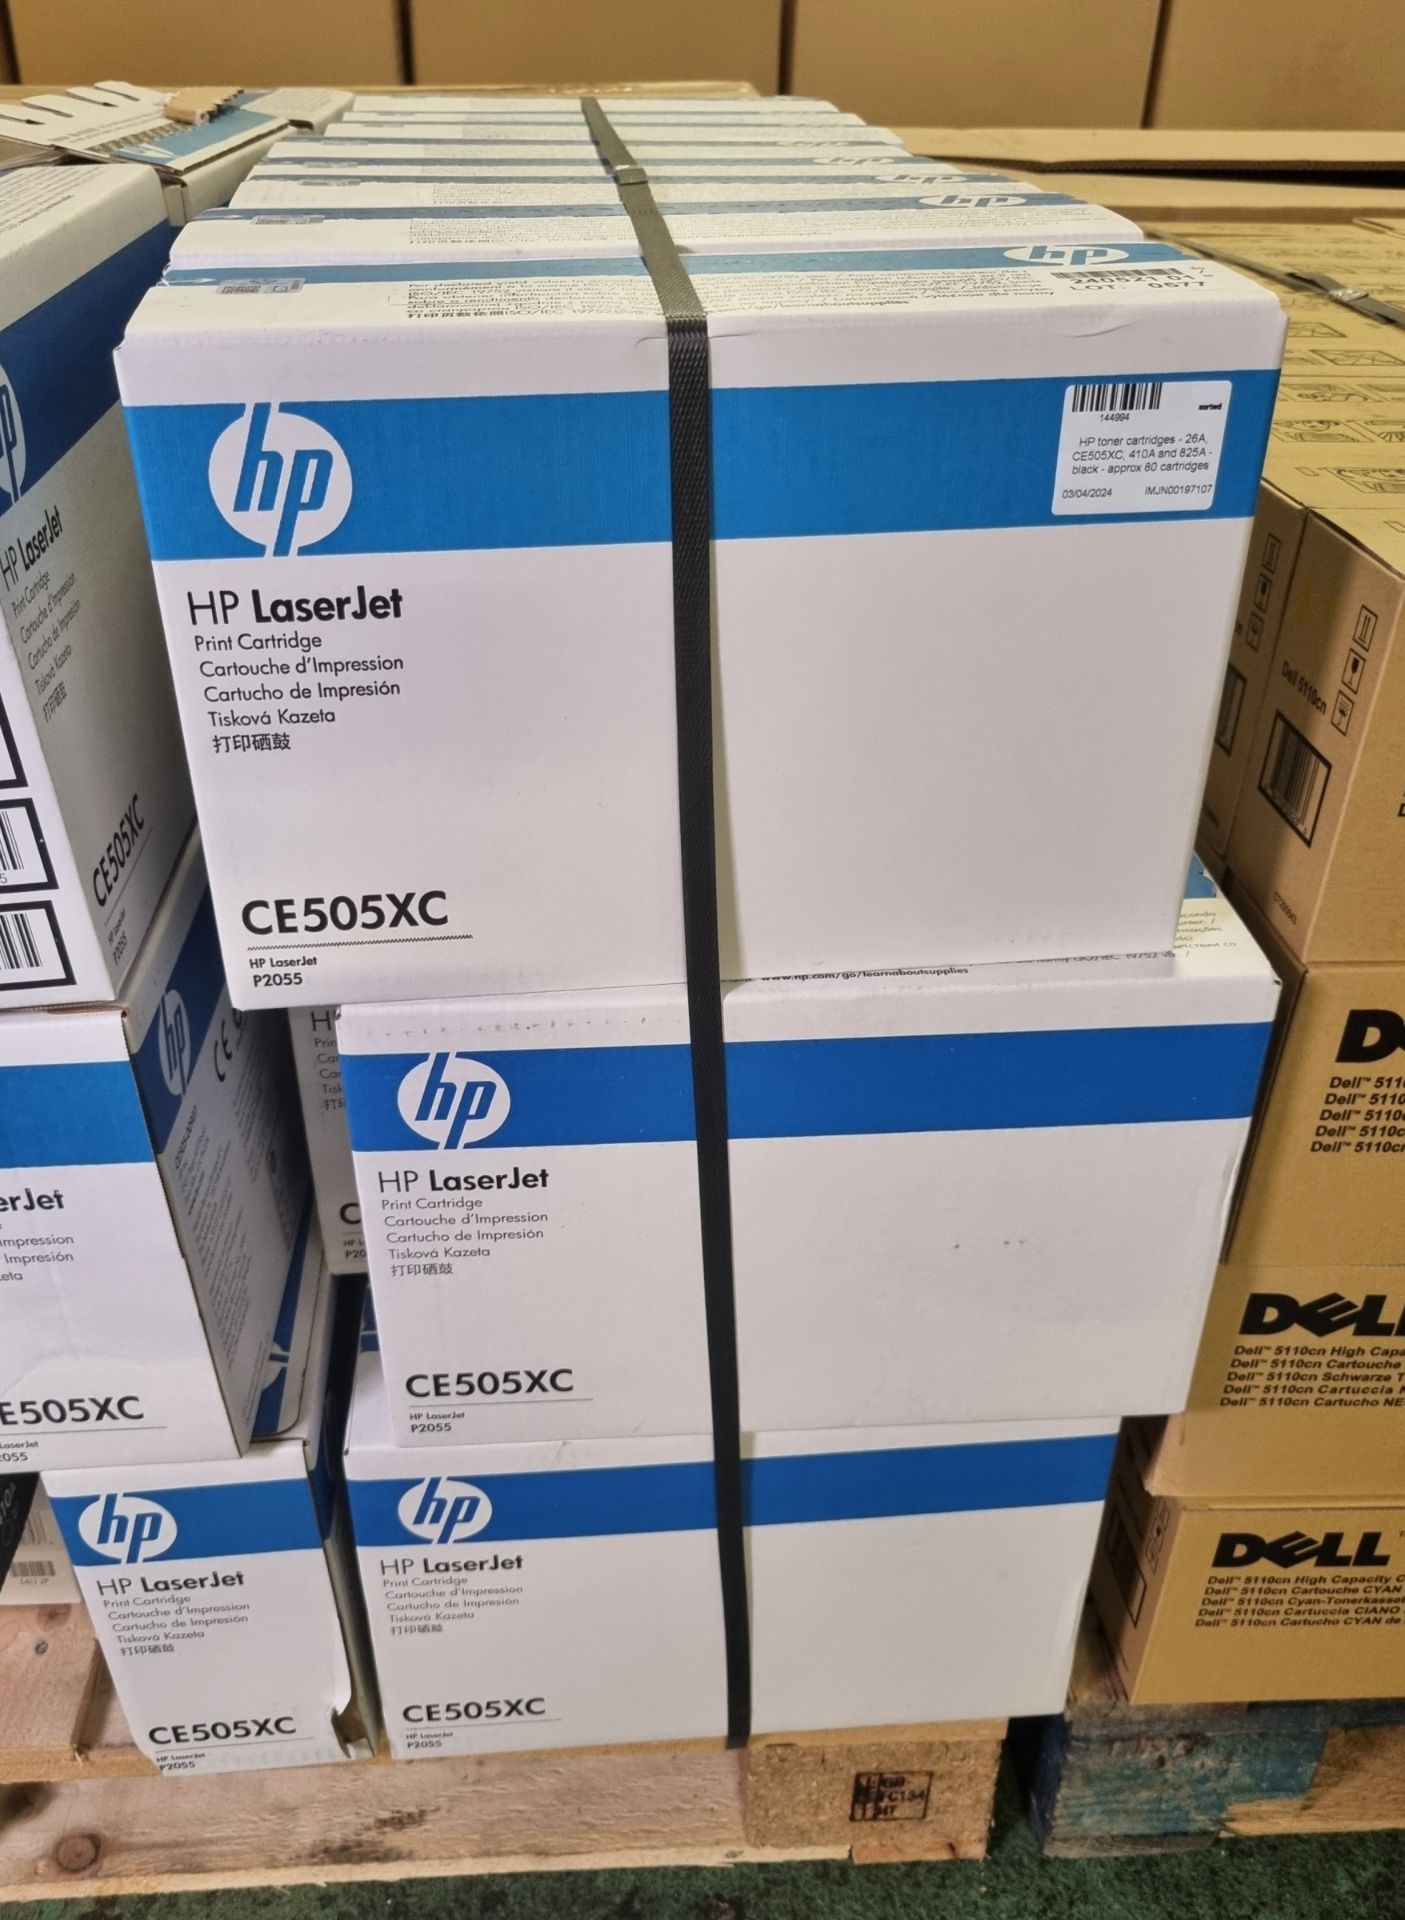 HP toner cartridges - 26A, CE505XC, 410A and 825A - black - approx. 80 cartridges - Image 5 of 6